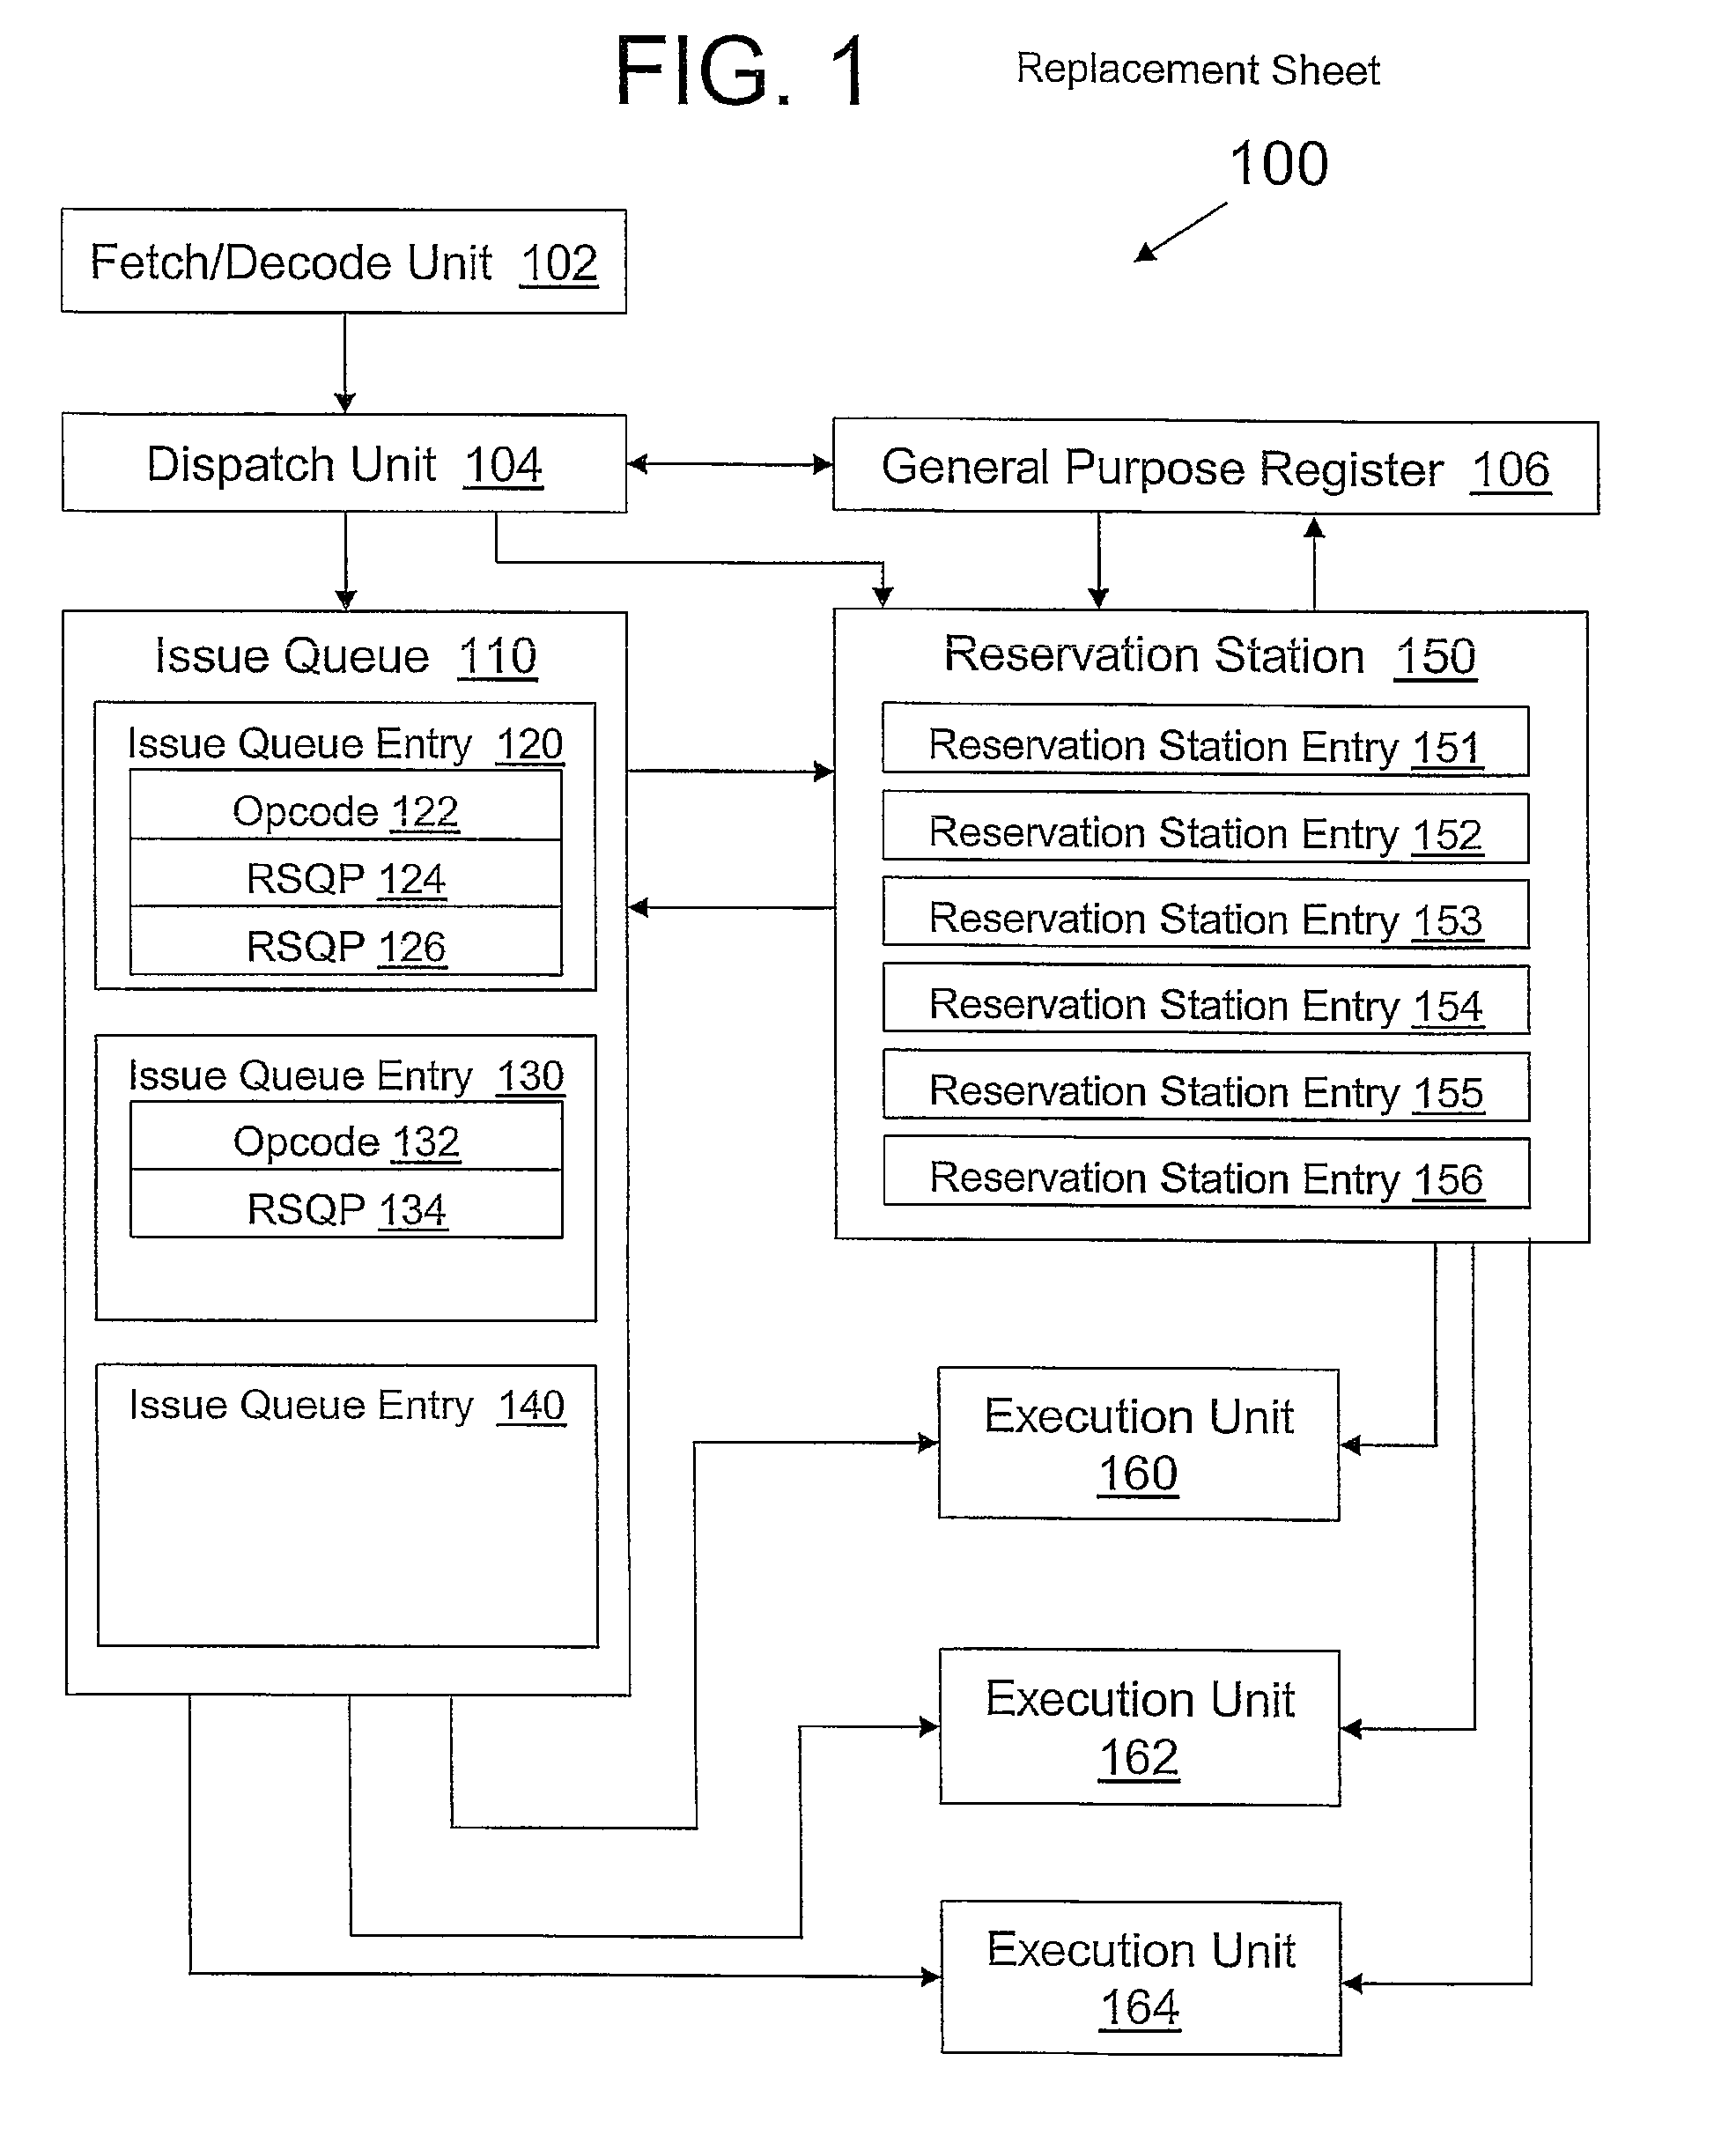 Adaptive allocation of reservation station entries to an instruction set with variable operands in a microprocessor